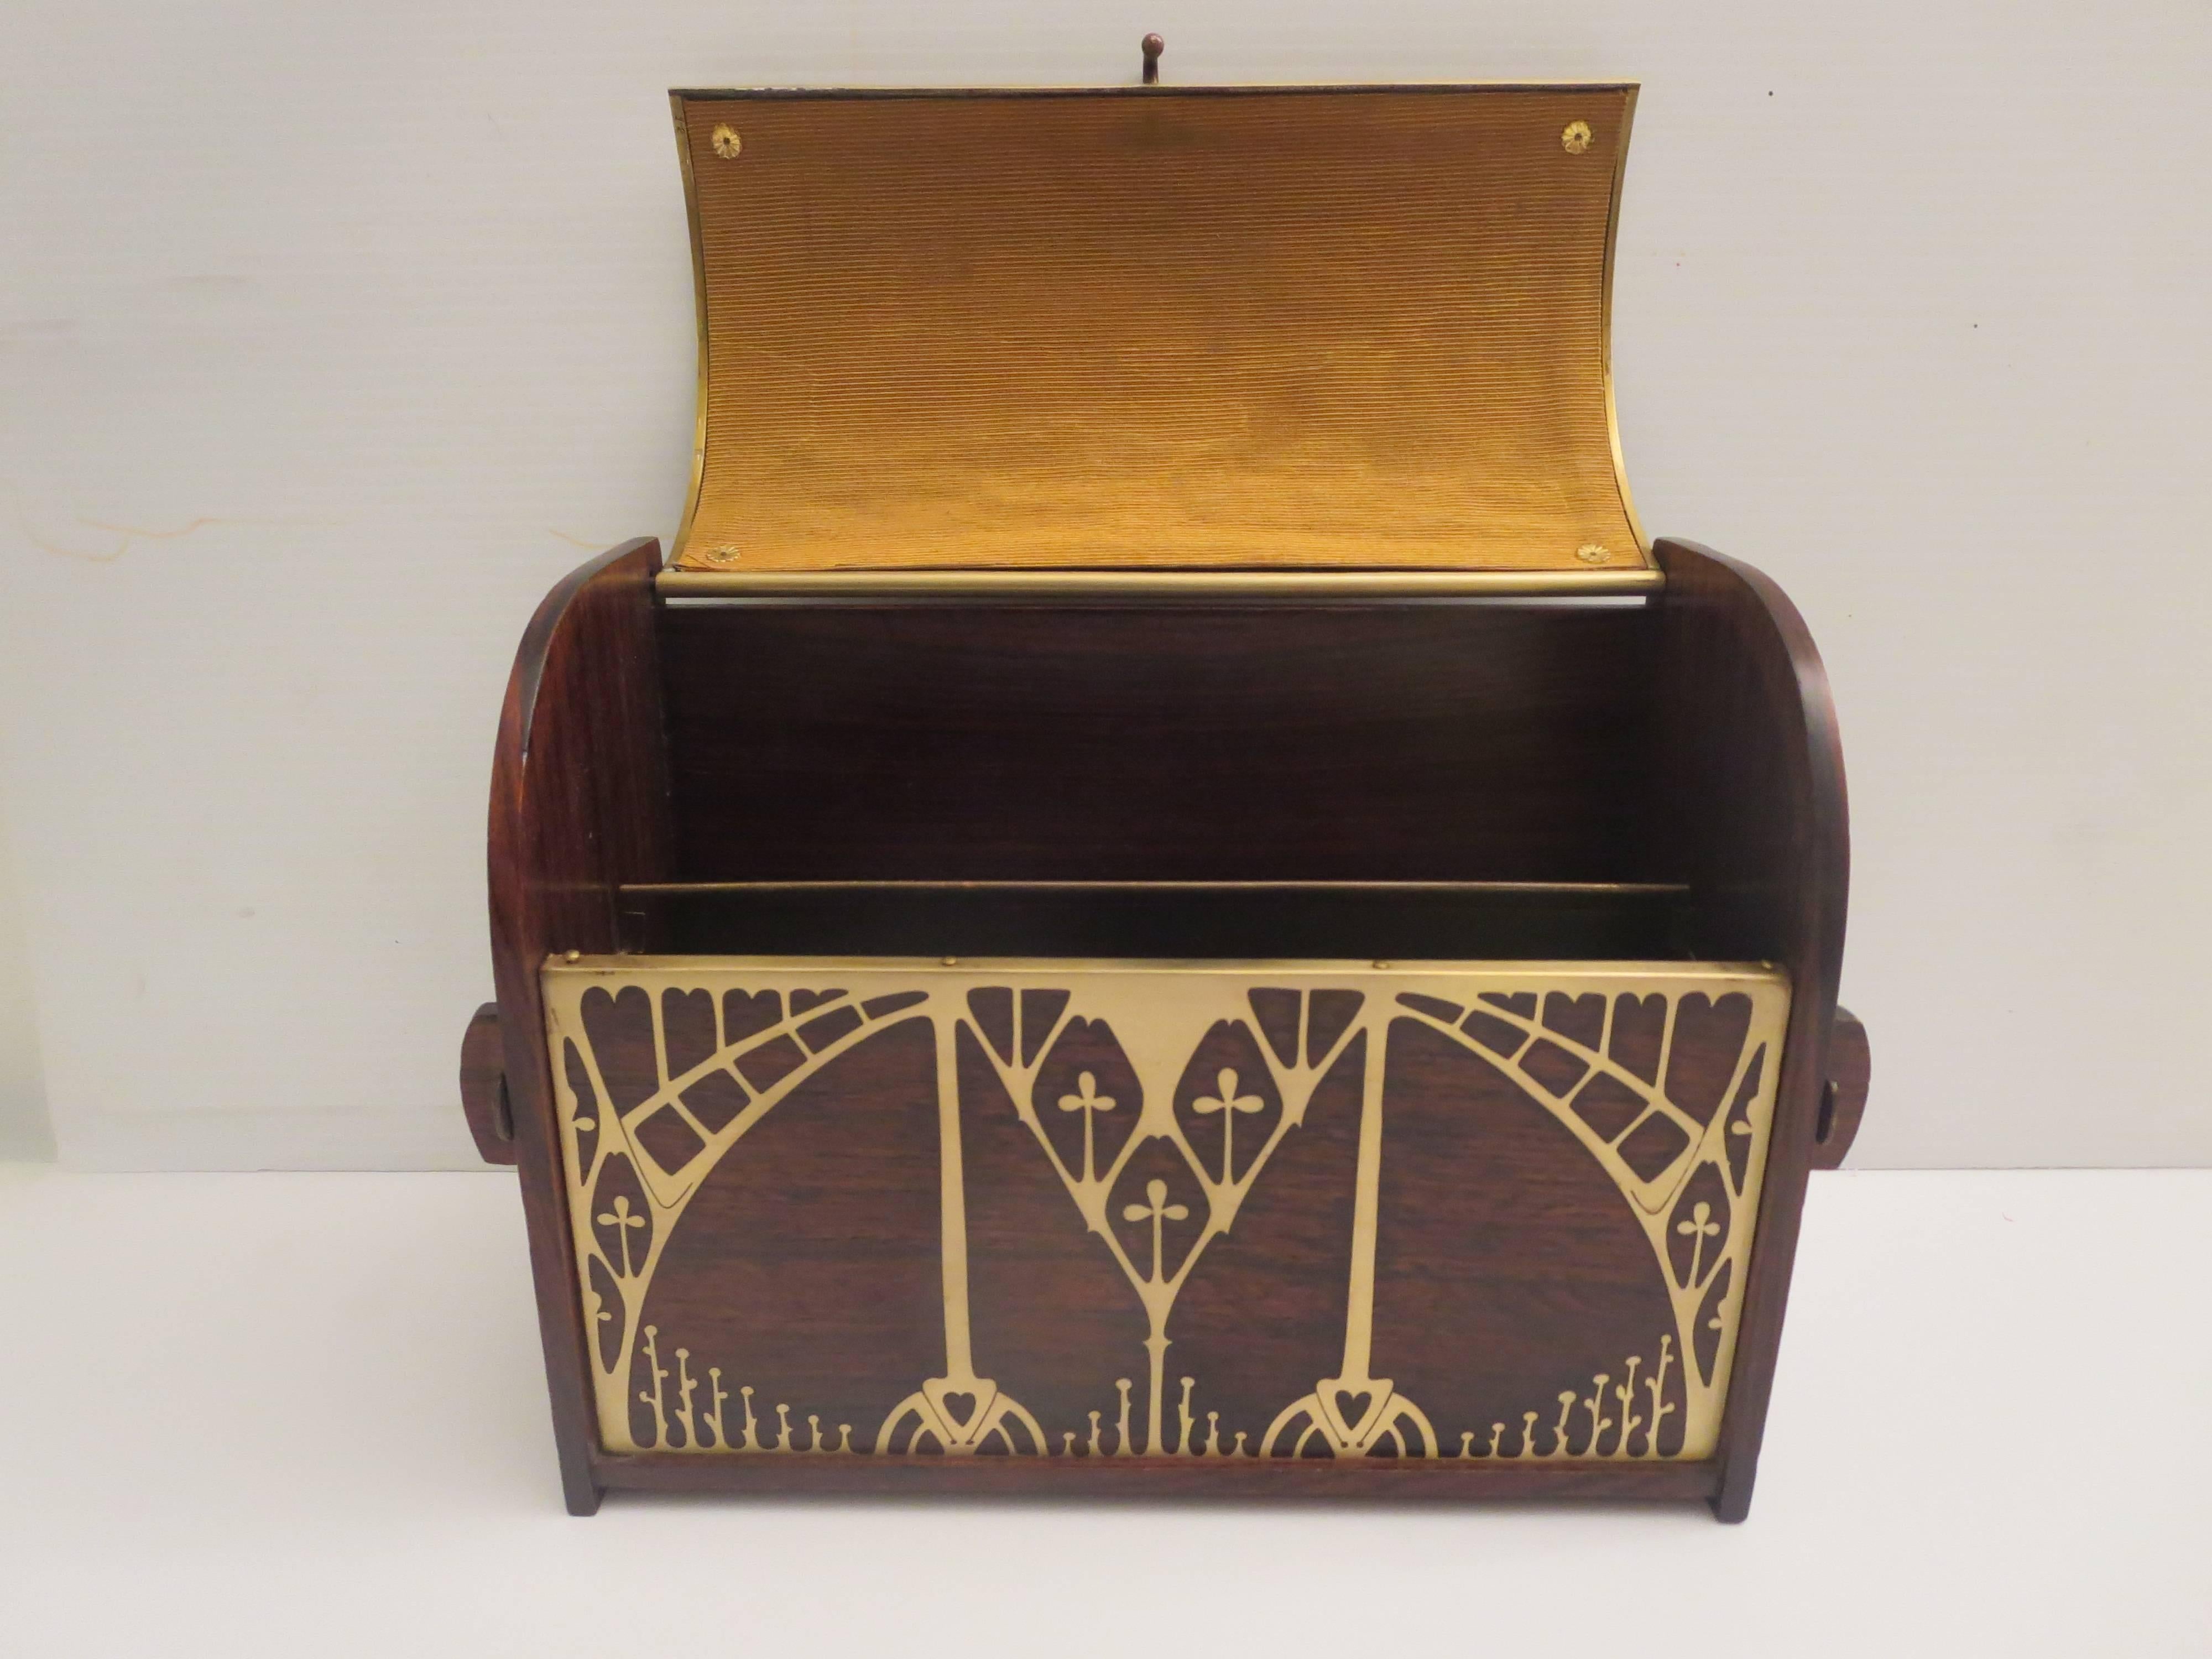 German Rare Early 1900s Art Nouveau Rosewood and Brass Writing Box